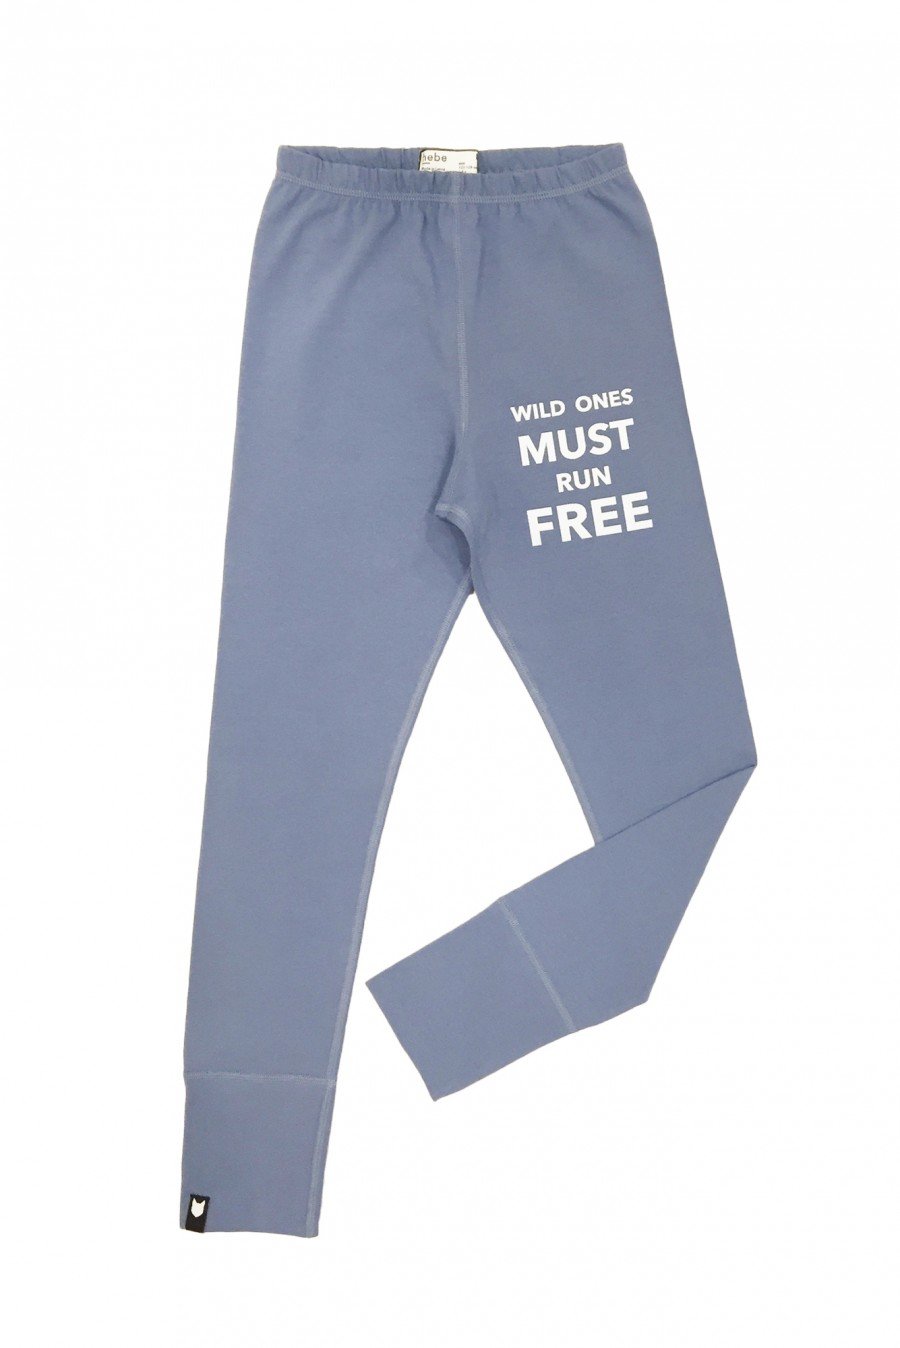 Blue leggings with quote ZLE1004